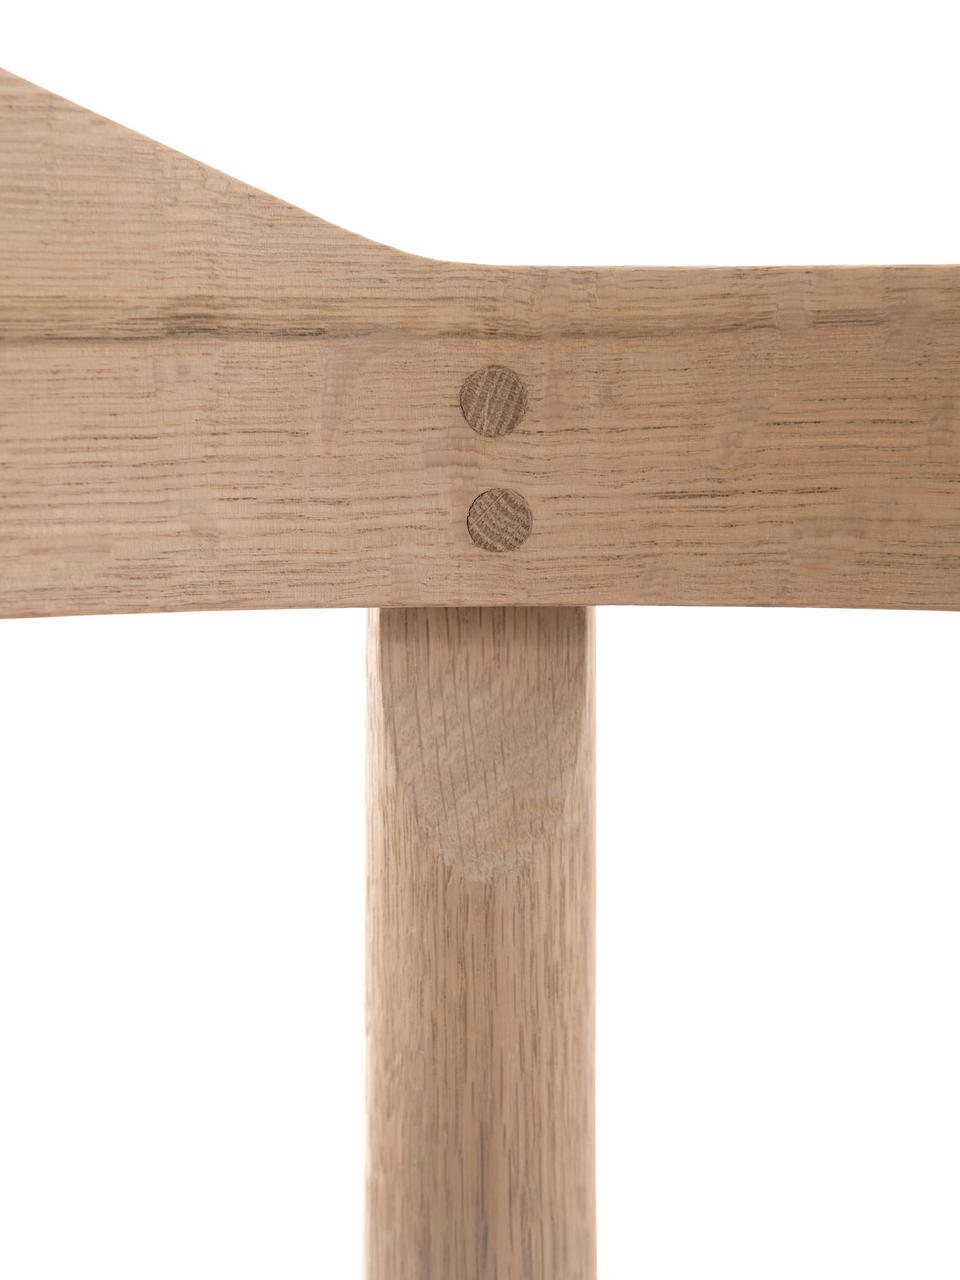 A detail photo of the backrest attachment of the Counting Calories chair.